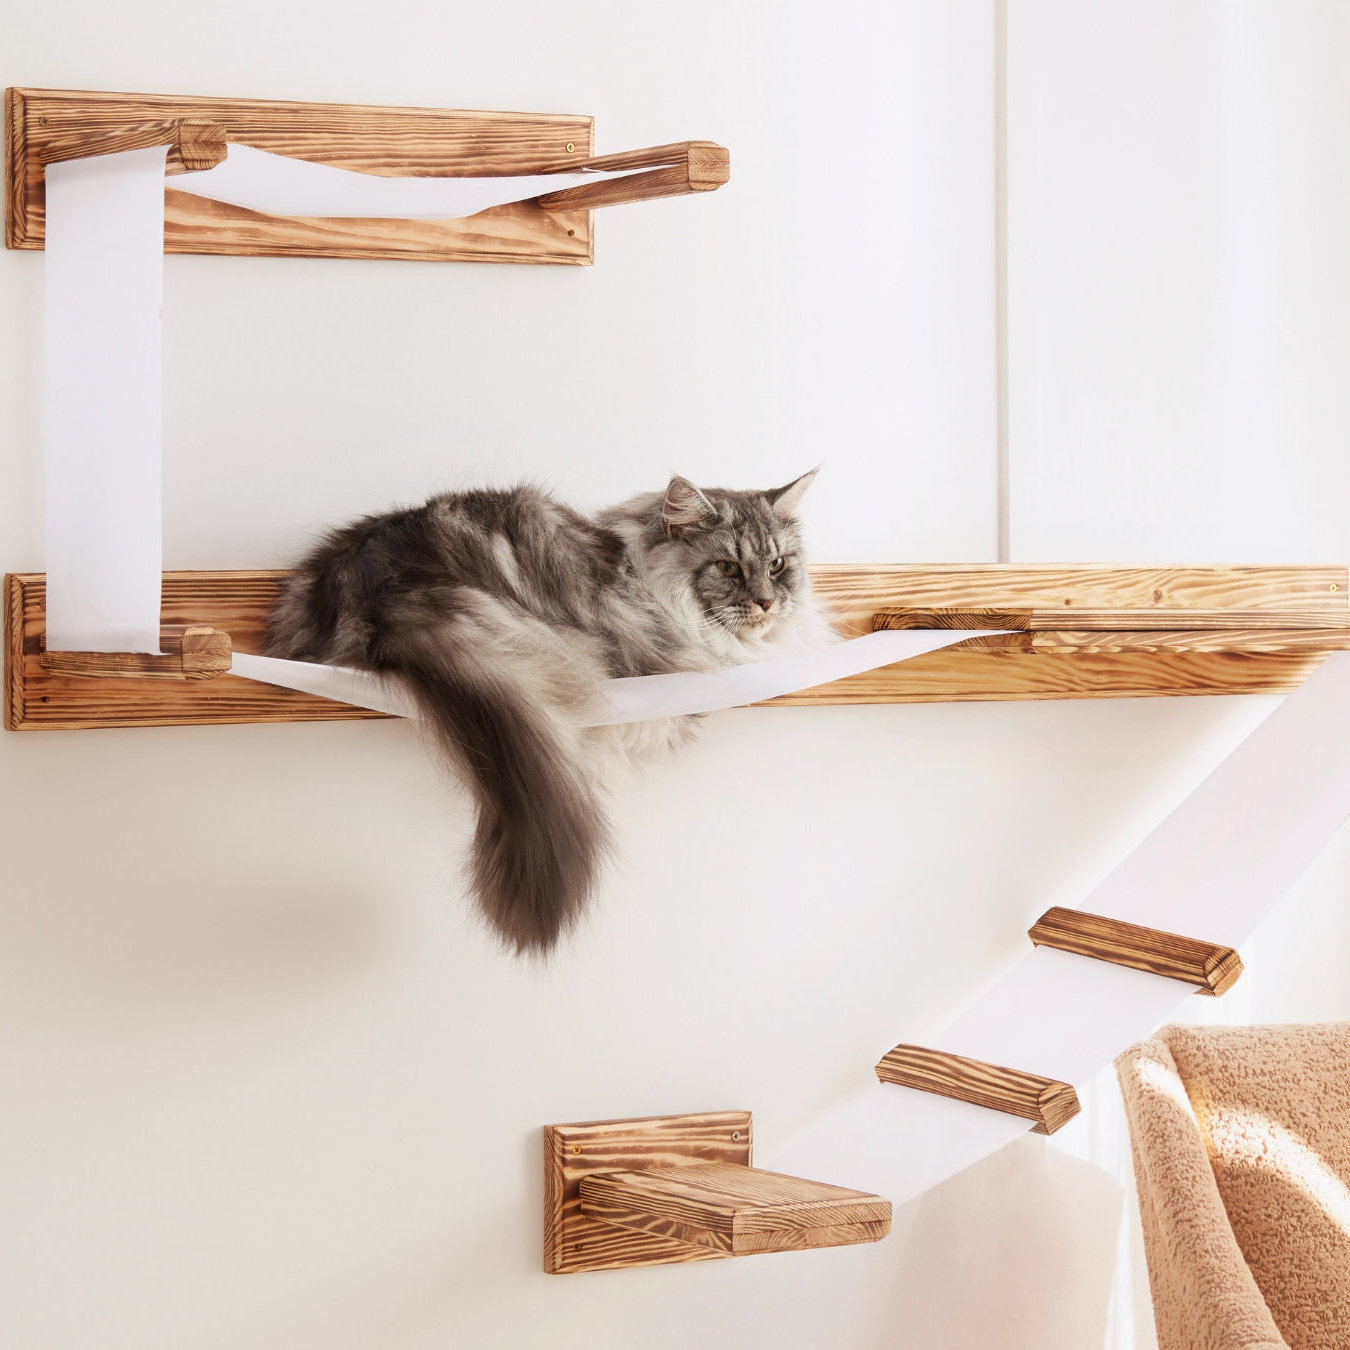 15 Pieces of Modern Cat Furniture You and Your Pet Can Agree On